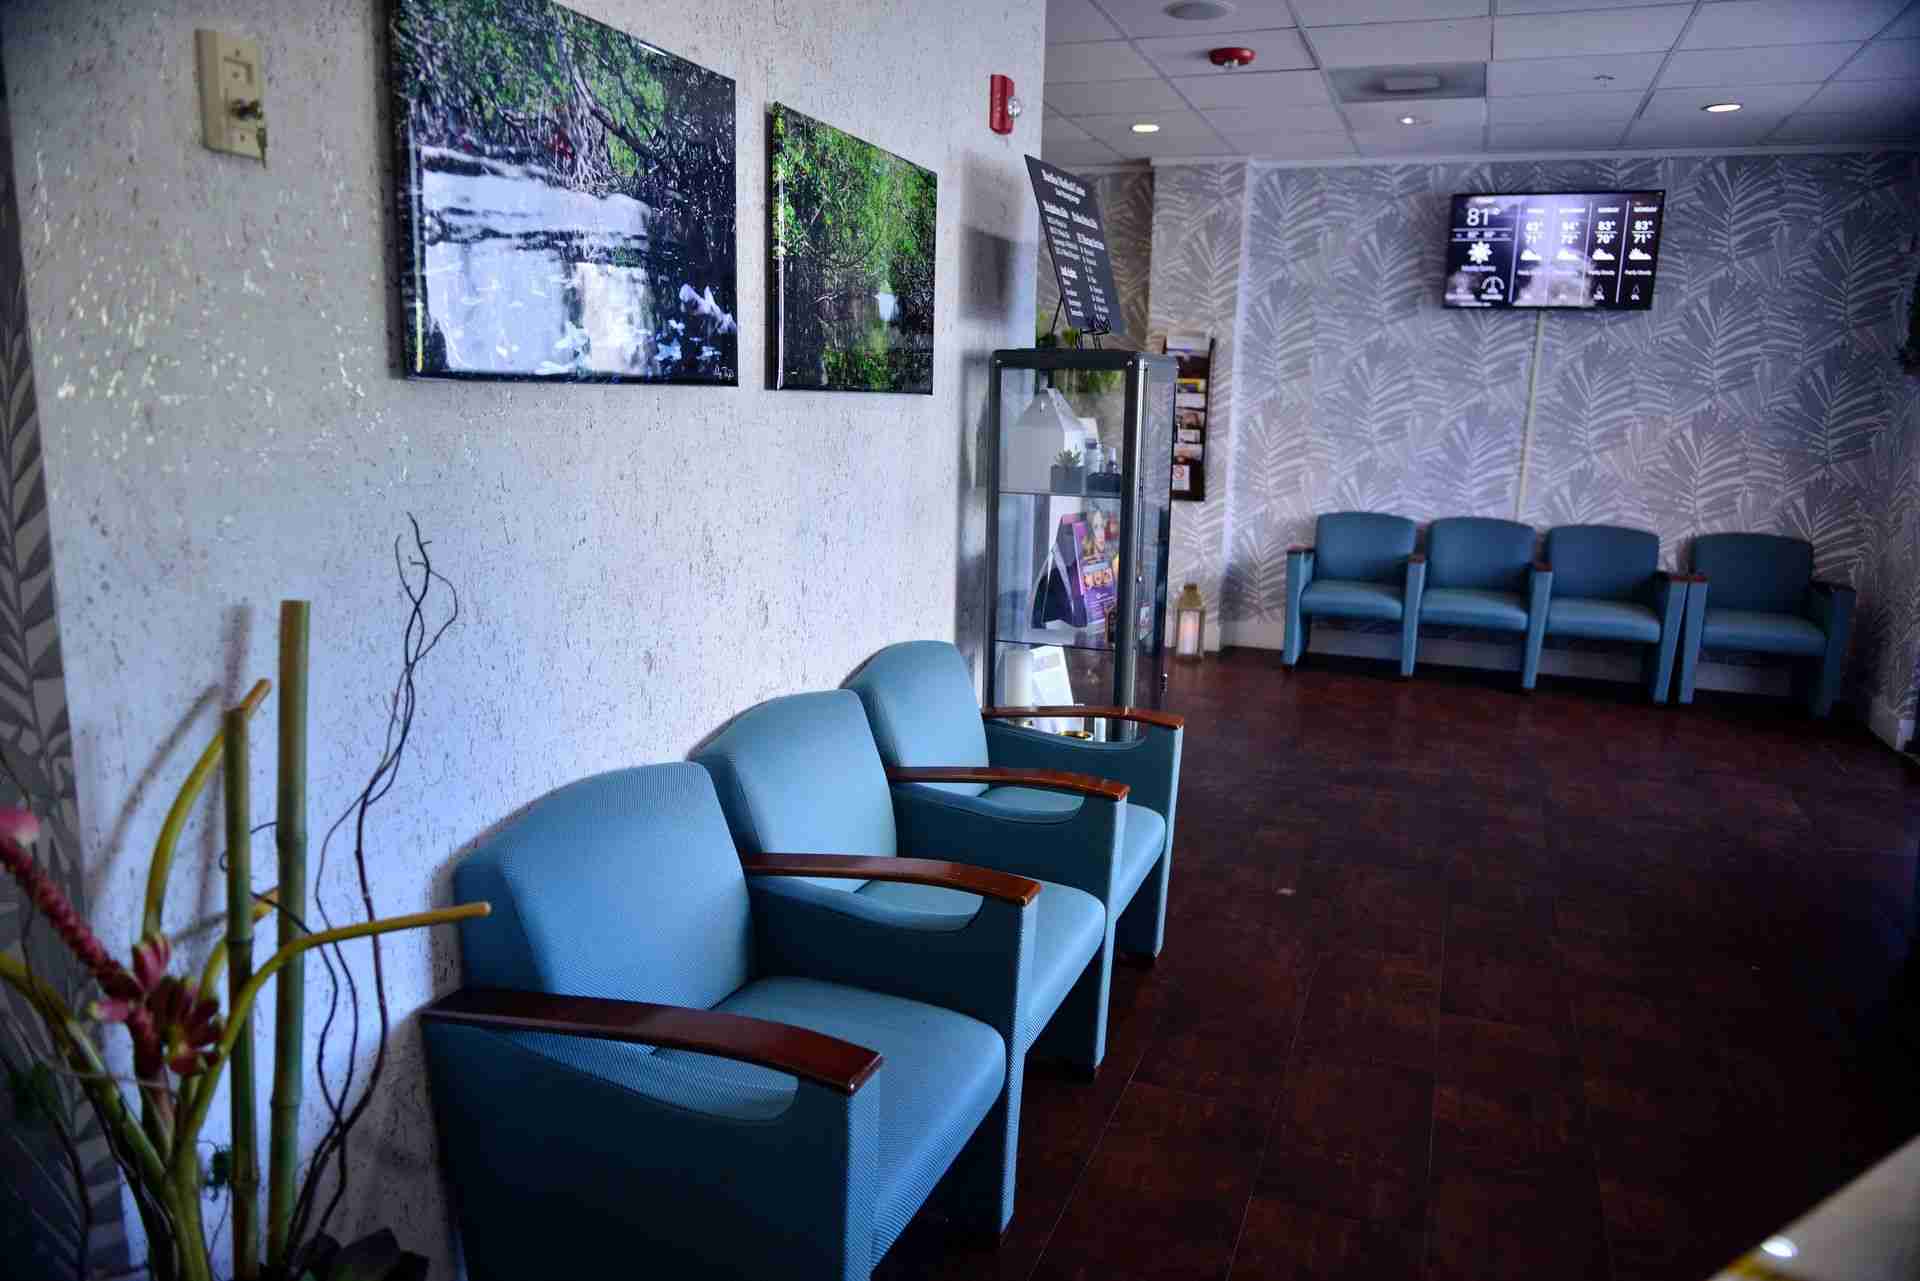 Waiting room with blue chairs, white counter and paintings on the white wall